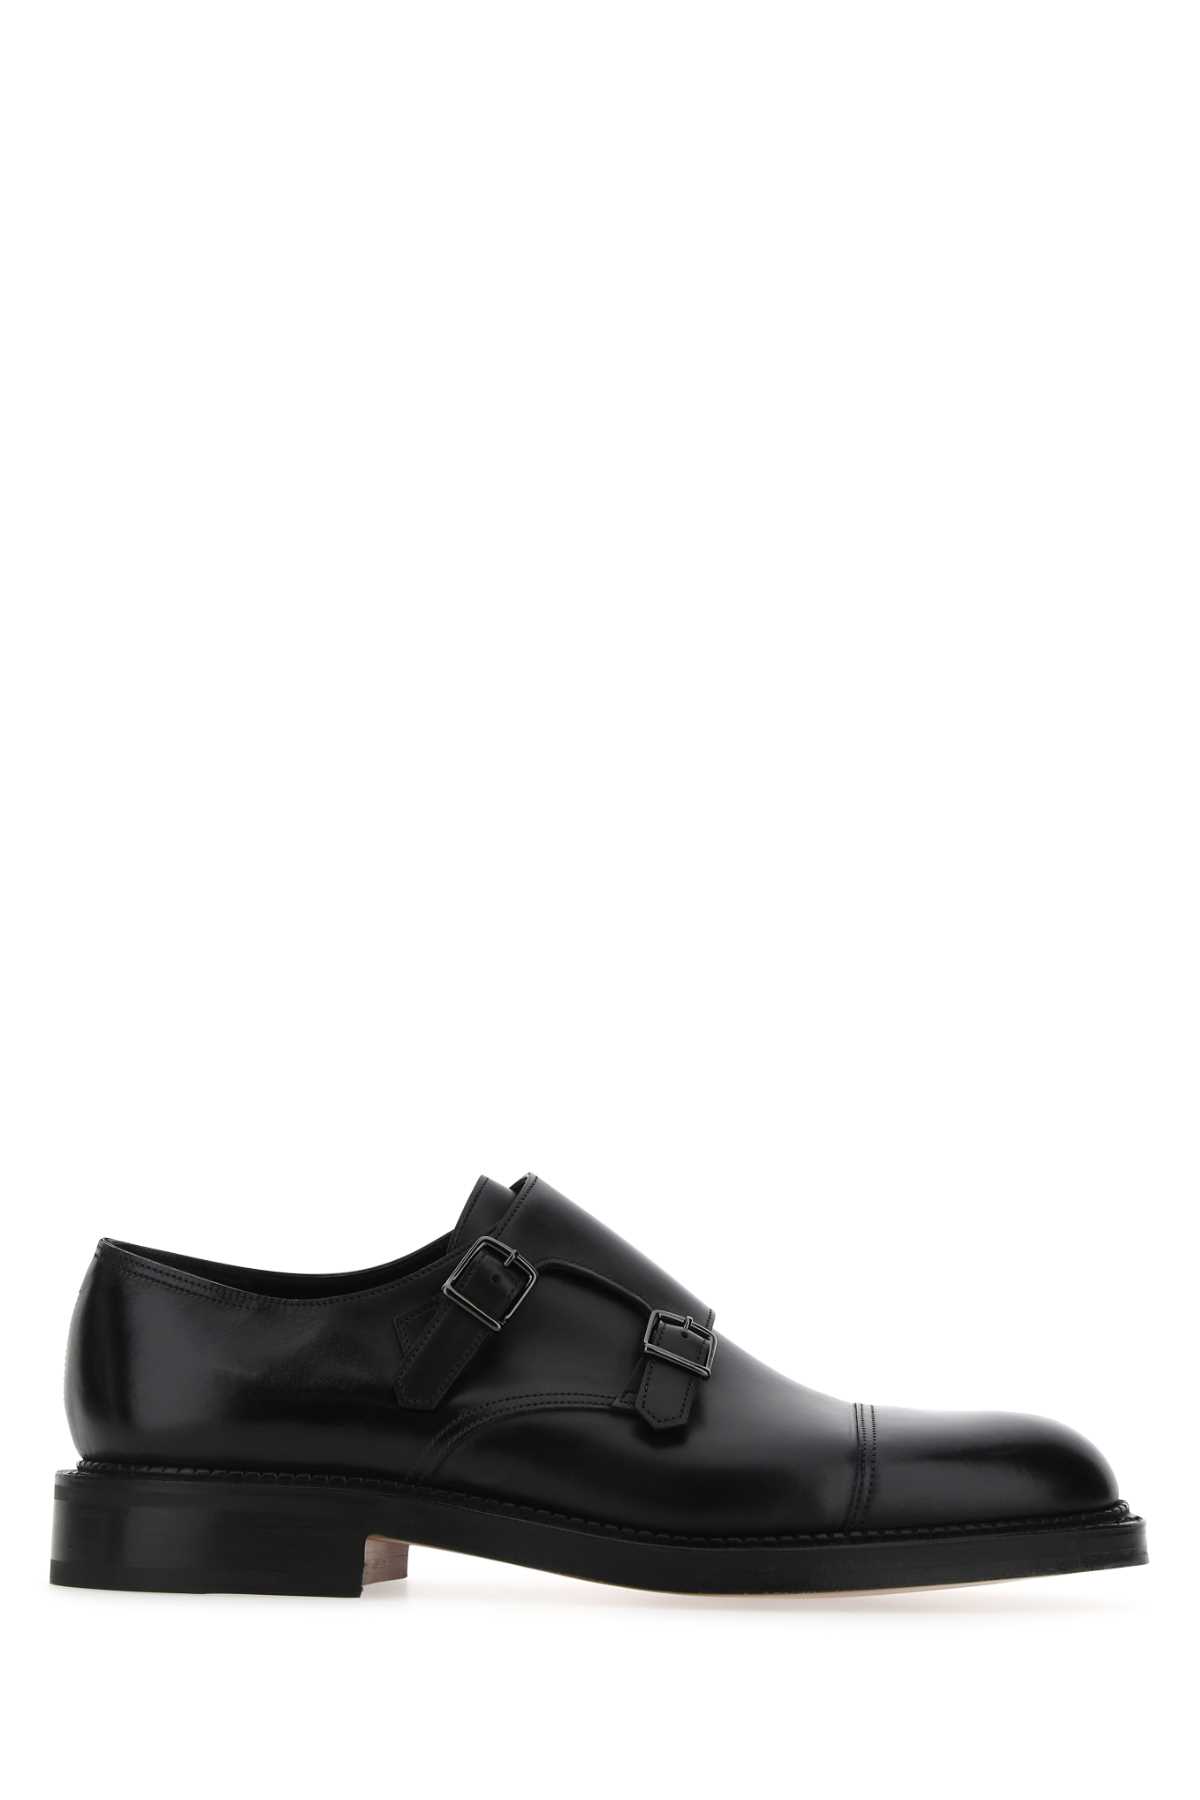 Black Leather William Monk Strap Shoes